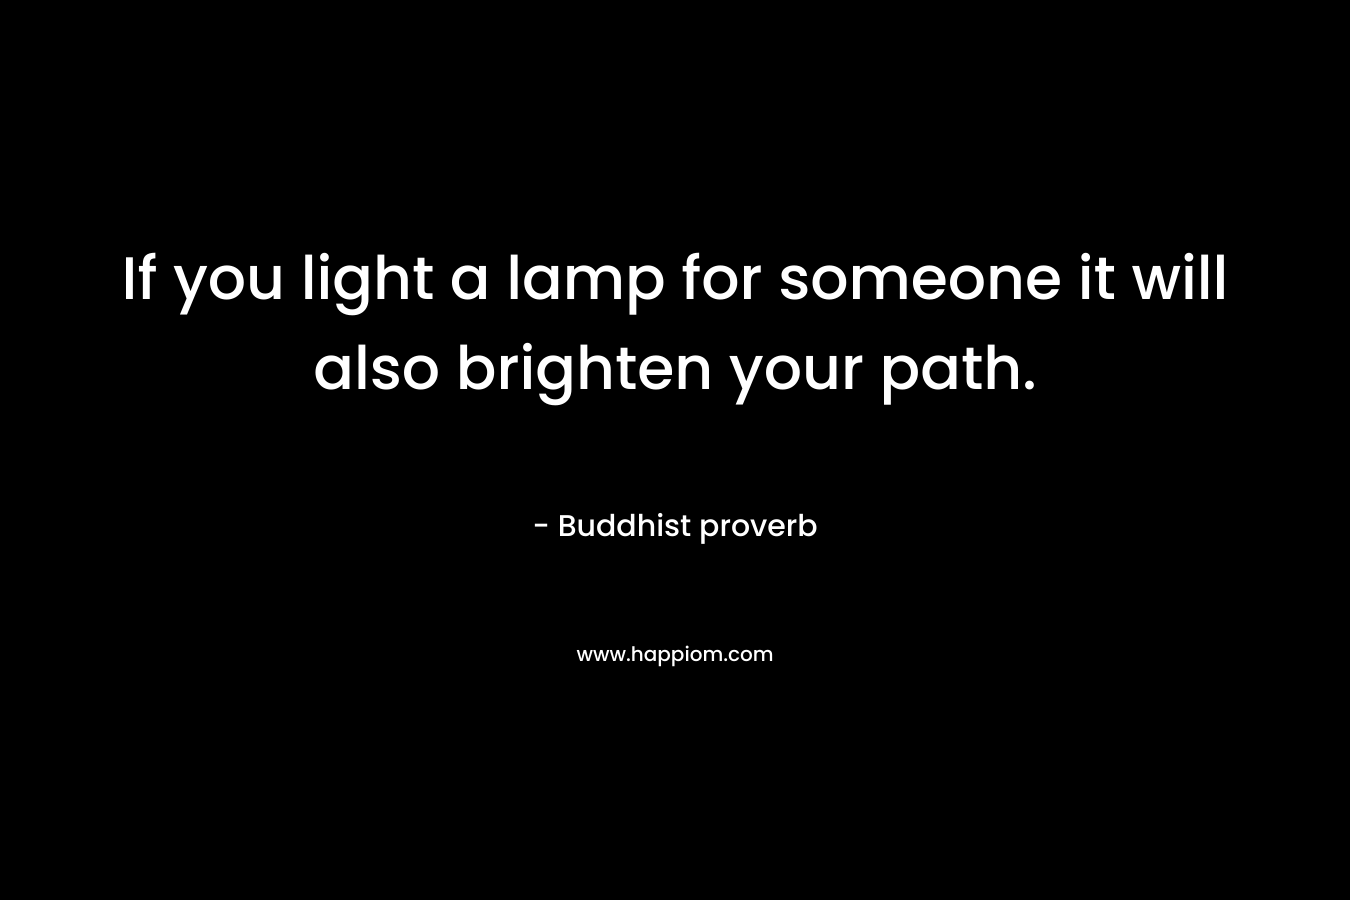 If you light a lamp for someone it will also brighten your path. – Buddhist proverb